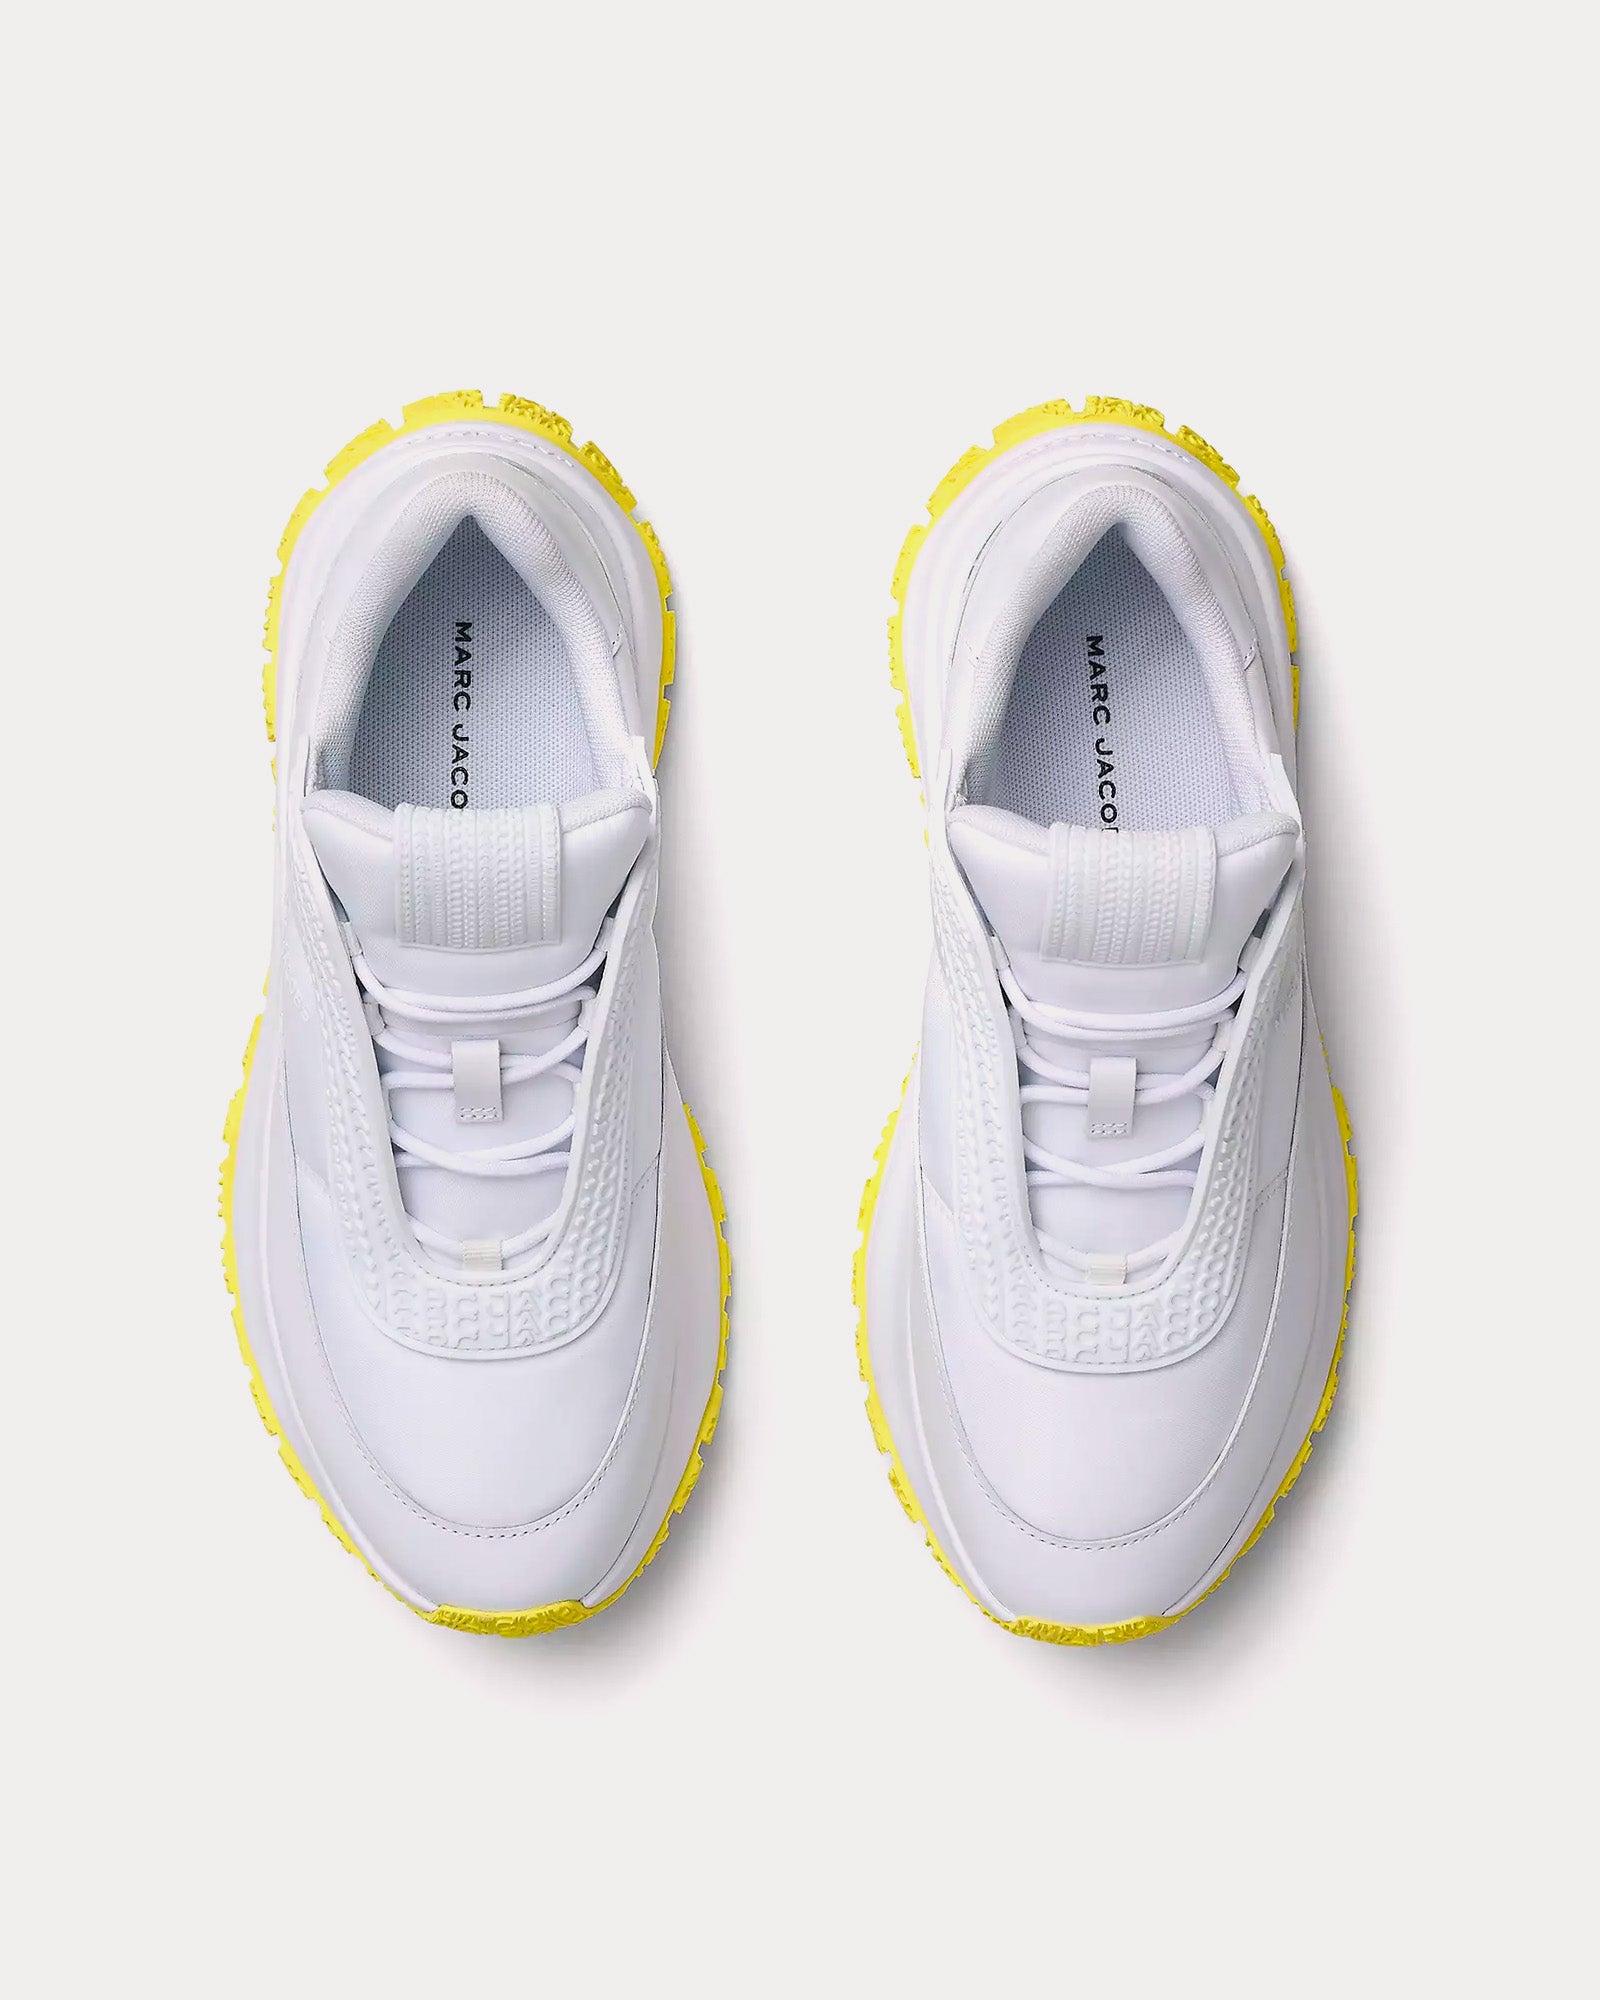 Marc Jacobs - The Lazy Runner White / Yellow Low Top Sneakers